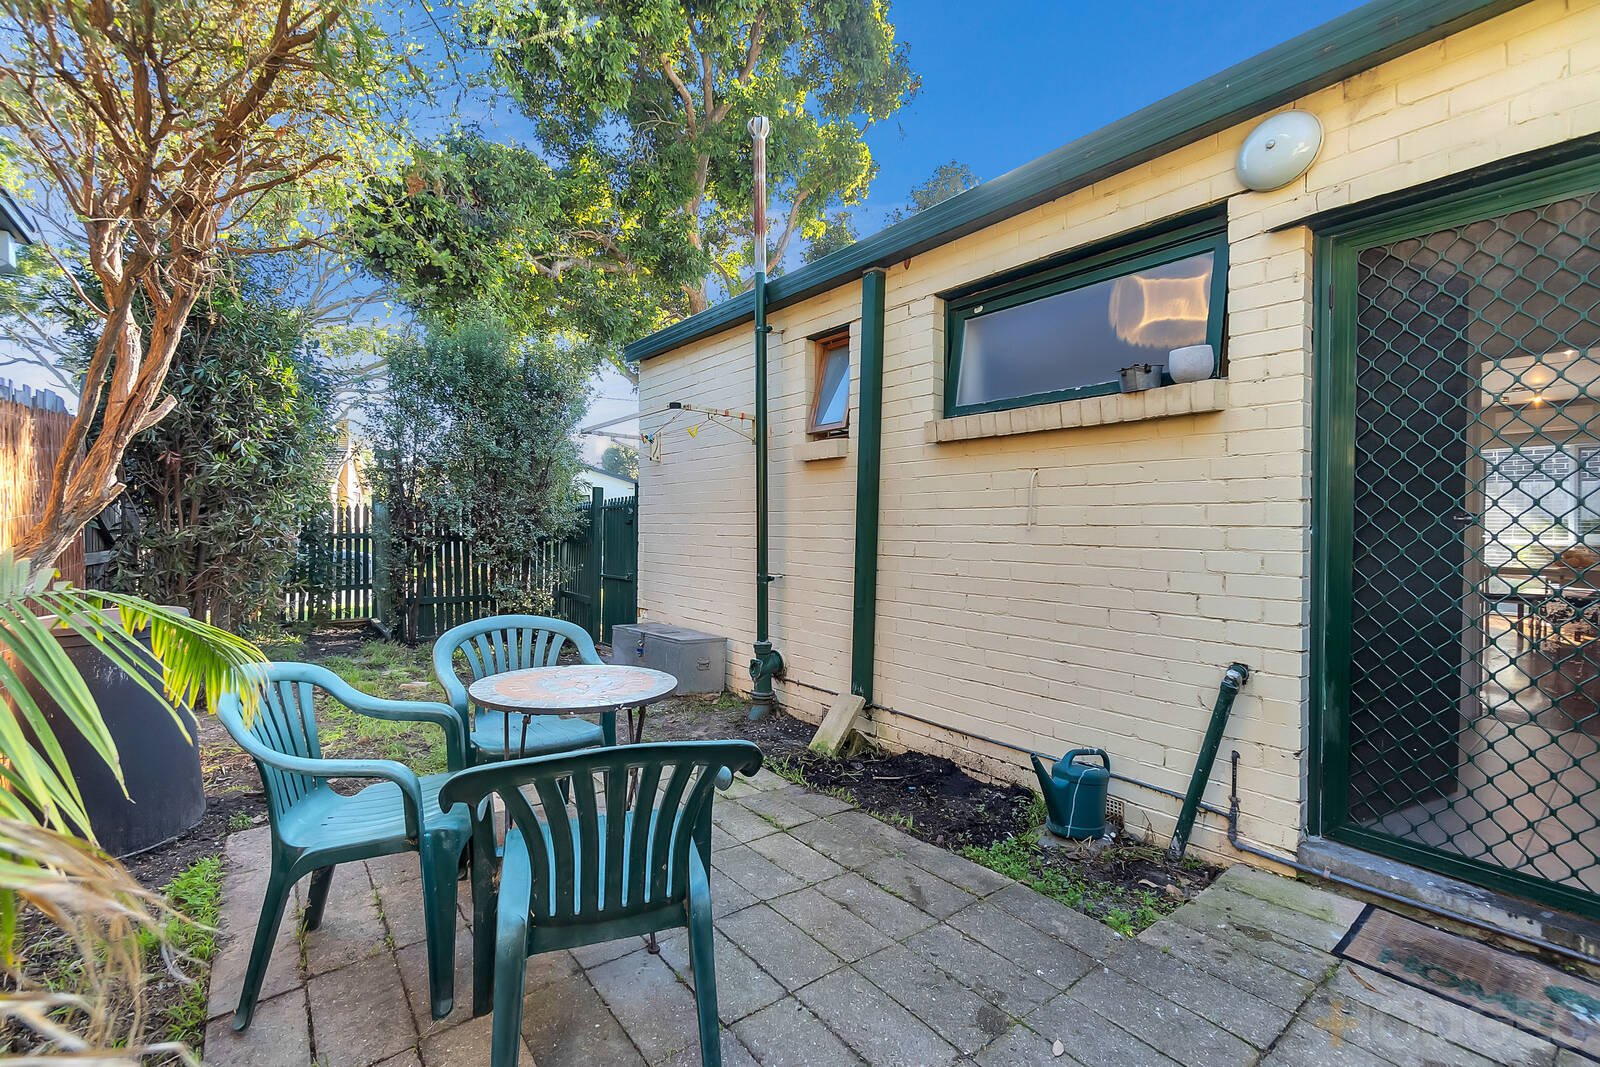 1 / 90 Northcliffe Road Edithvale